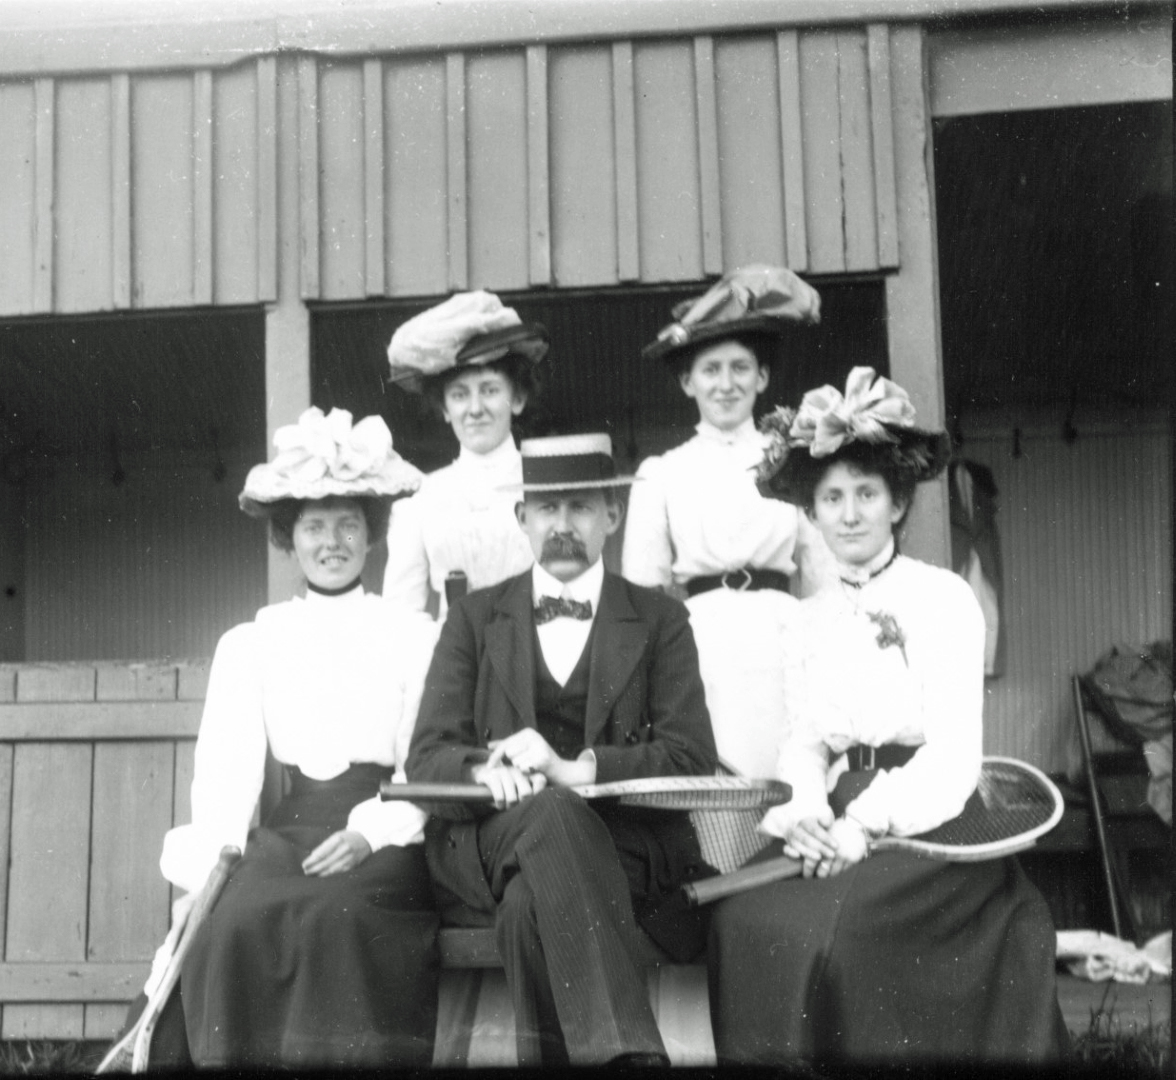 Ladies tennis team with hats and long skirts